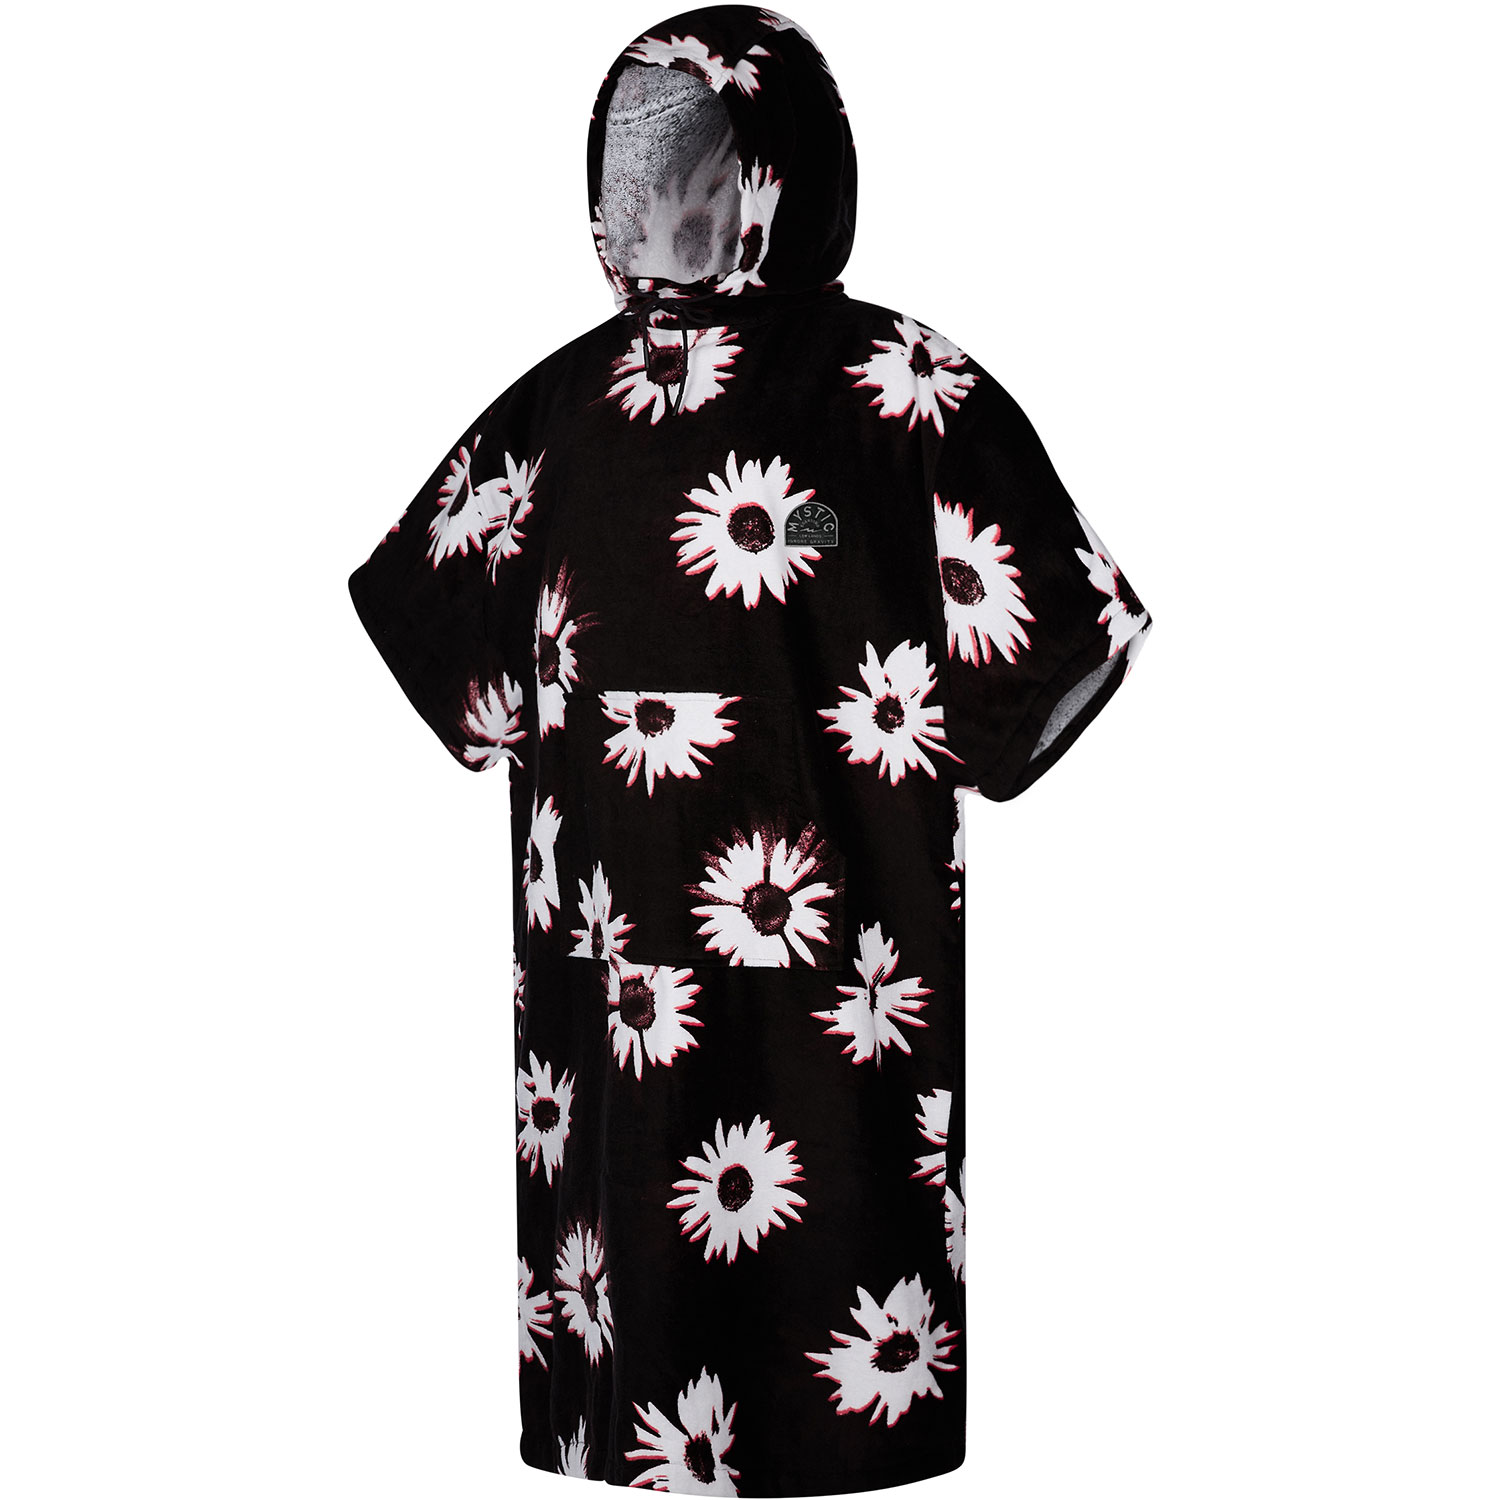 Mystic Poncho Changing Robe Towel Beach Watersports Surfing Change Robe